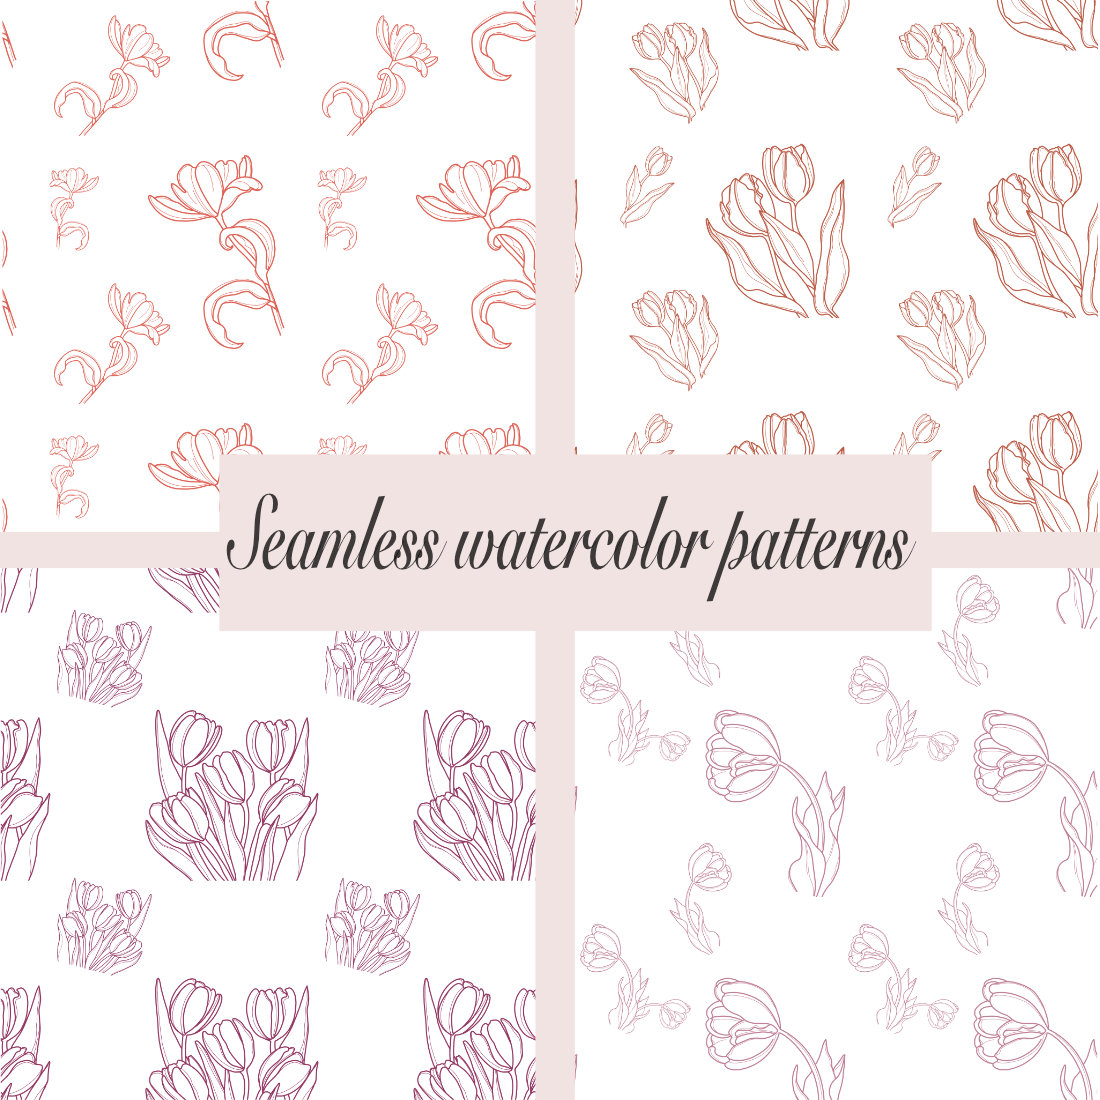 Seamless watercolor patterns preview image.